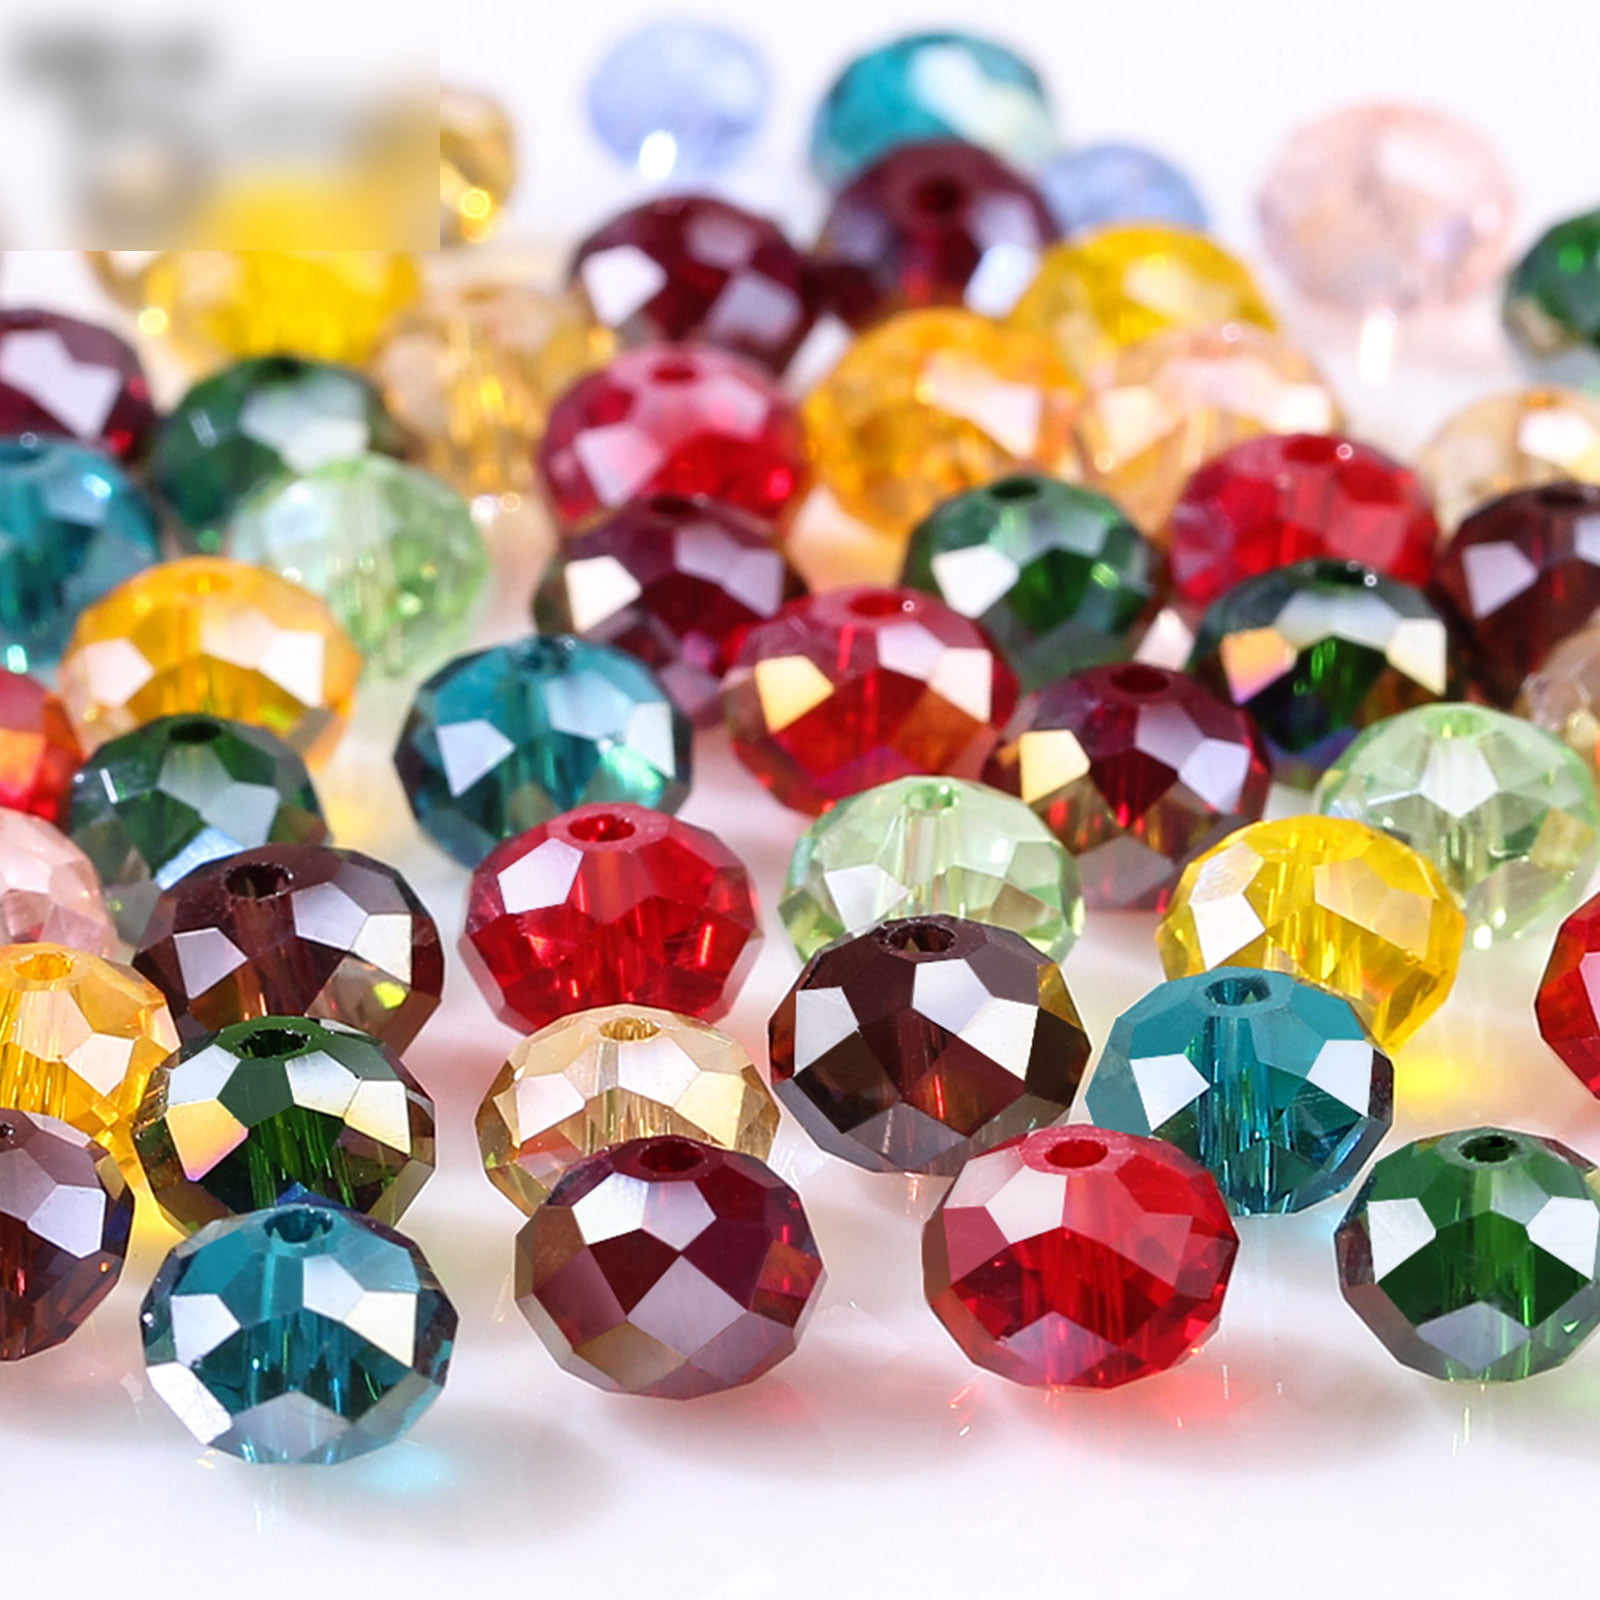 Cube Square Czech Crystal Faceted Rondelle Beads Loose Beads 4MM 6MM 8MM 